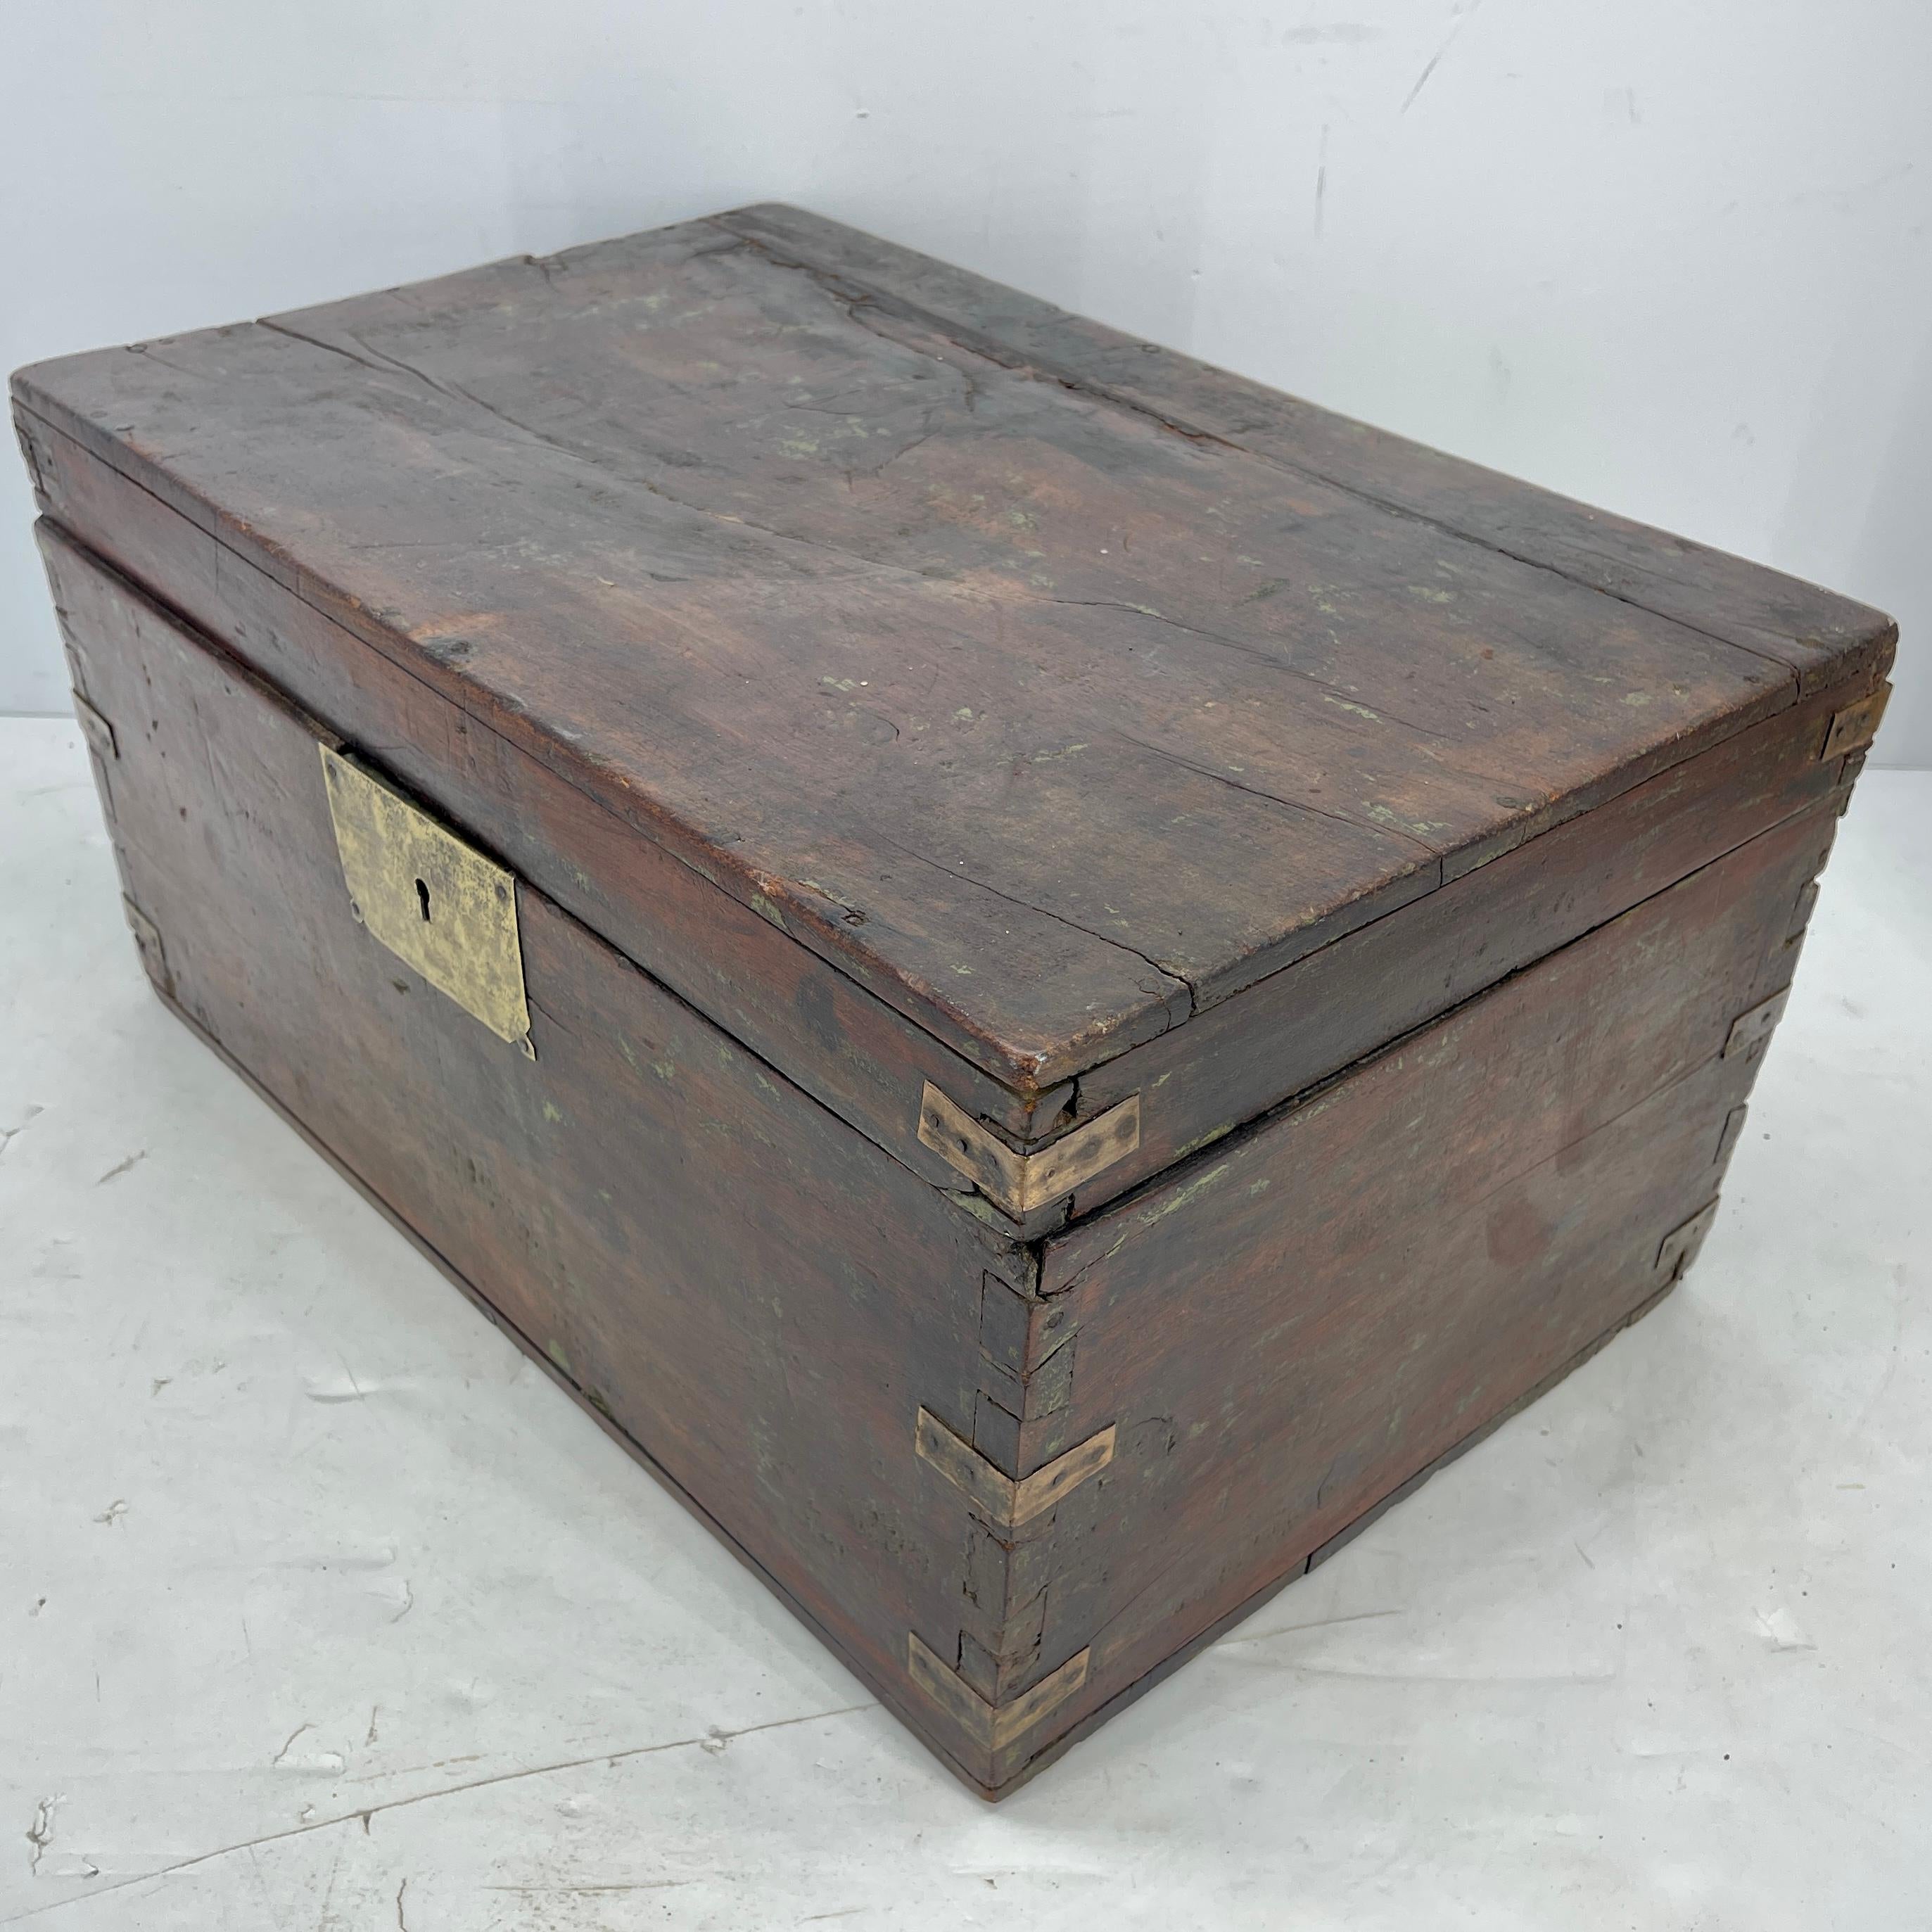 Hand-Crafted Large Rectangular Antique Wooden Campaign Box with Brass Hardware For Sale